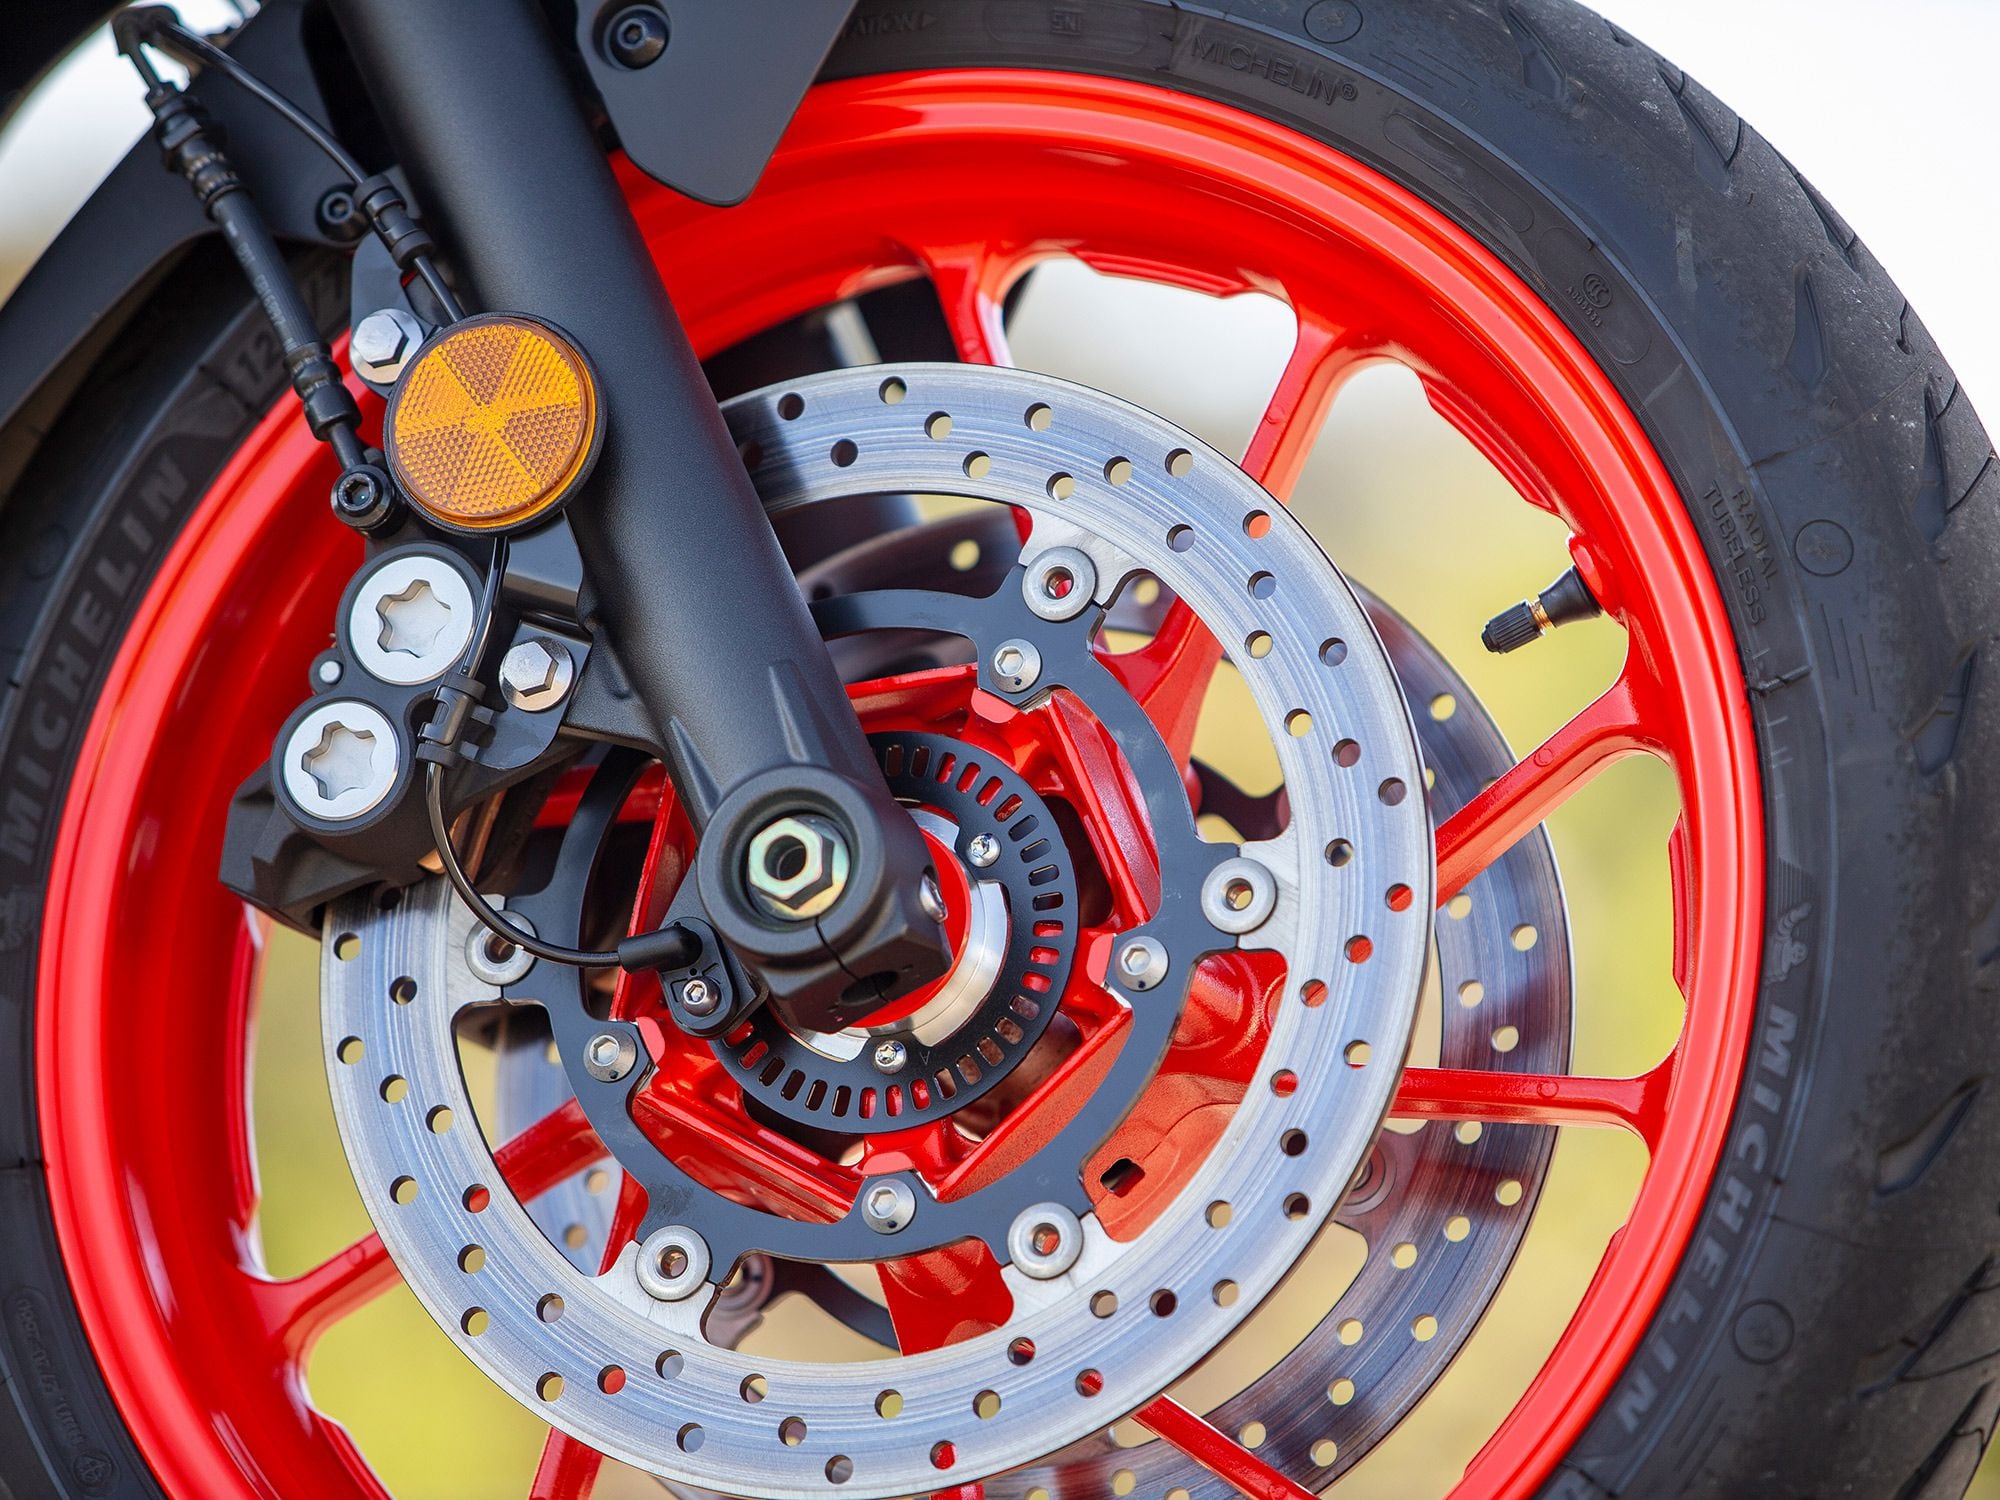 The front brake rotors have increased in size to 298mm and are round rather than wave or petal shaped.